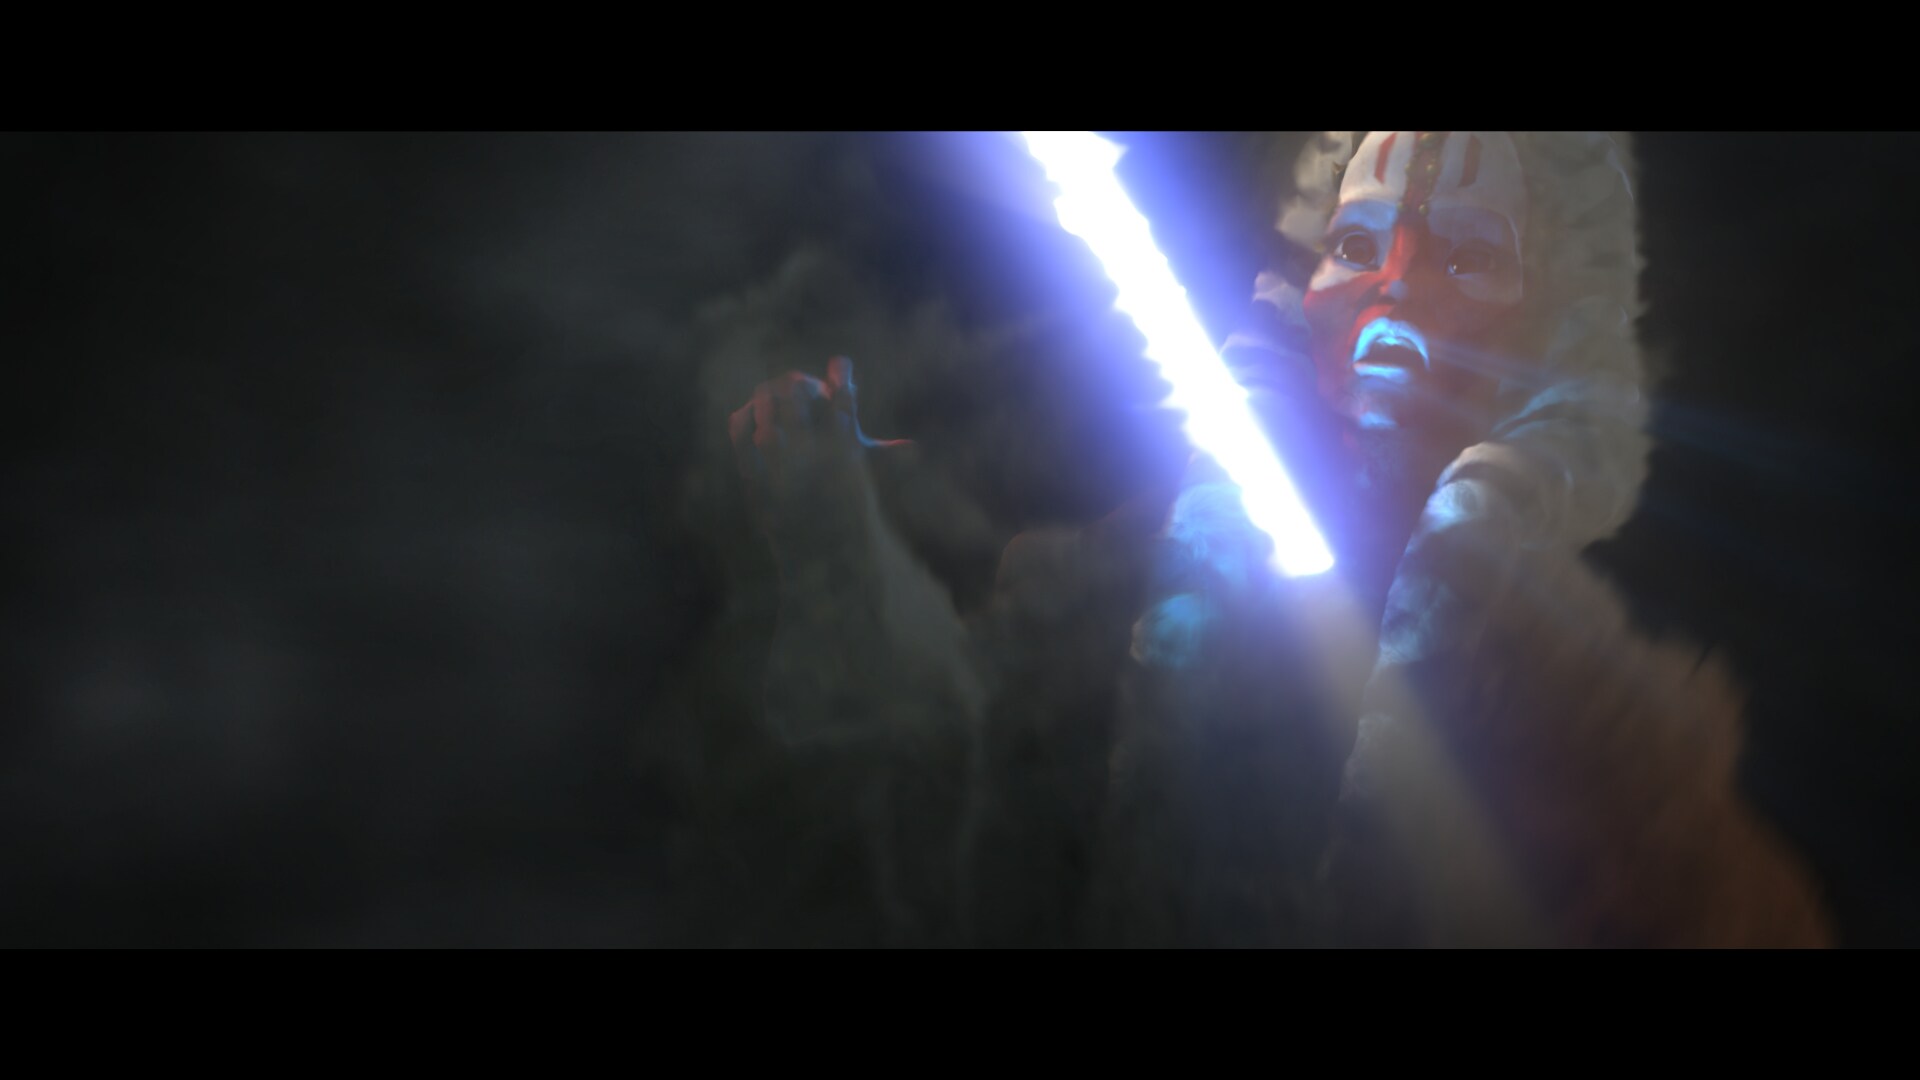 Clear in Yoda's visions is the confrontation between Sidious and the Jedi who attempted to arrest...